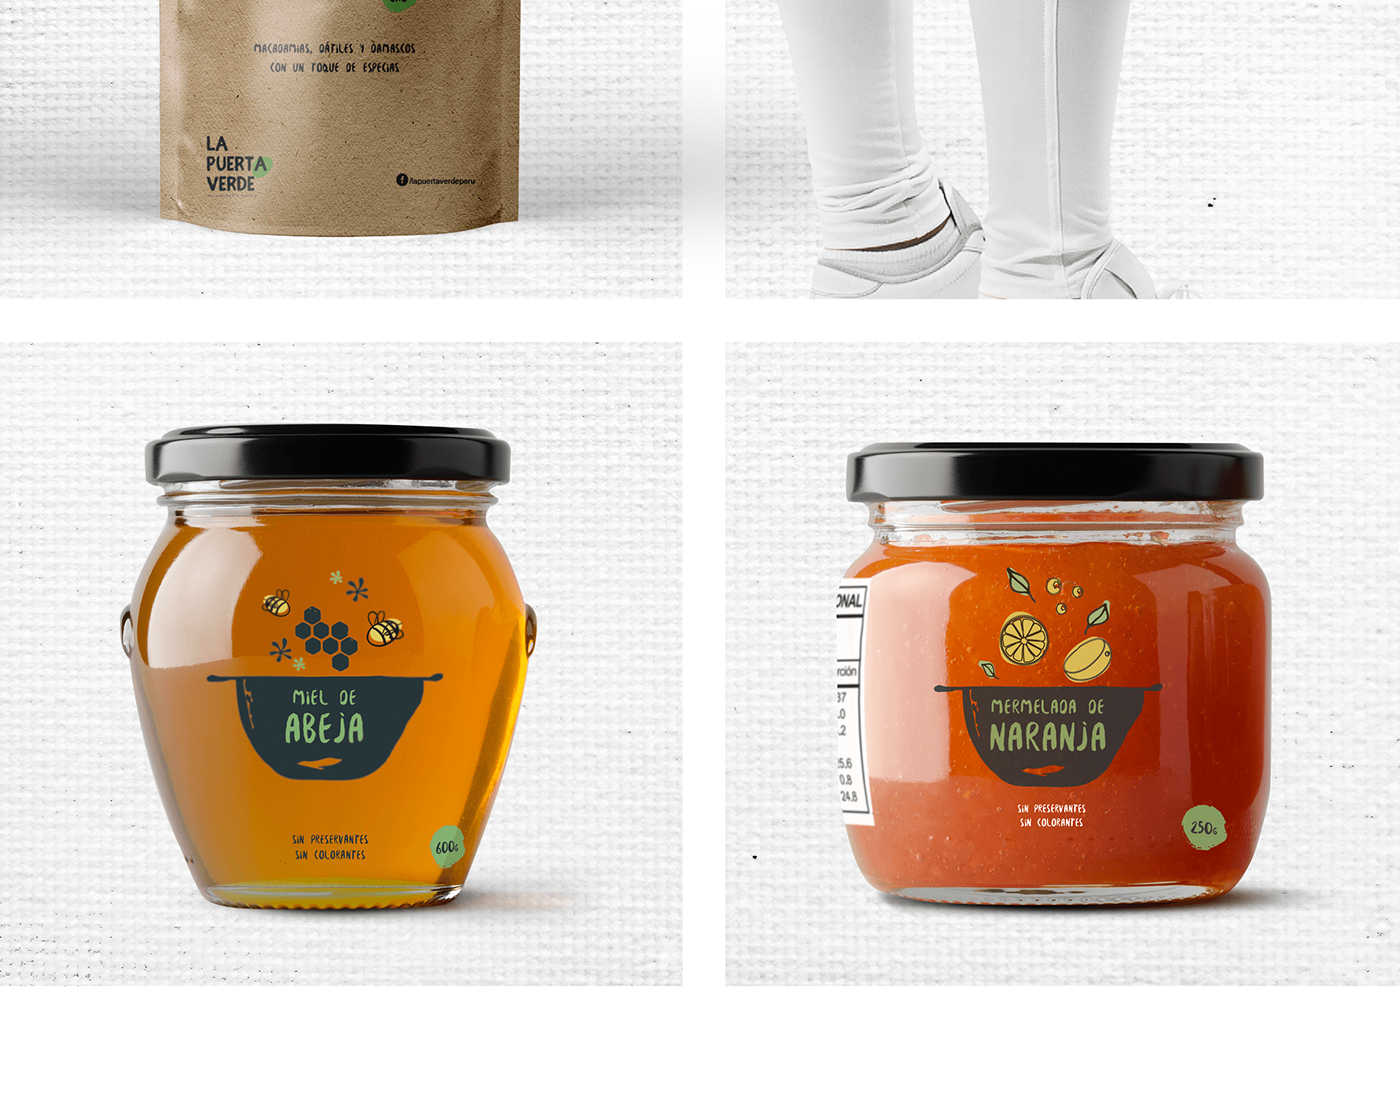 Illustration. Brand. packing. healthy food. Identity.